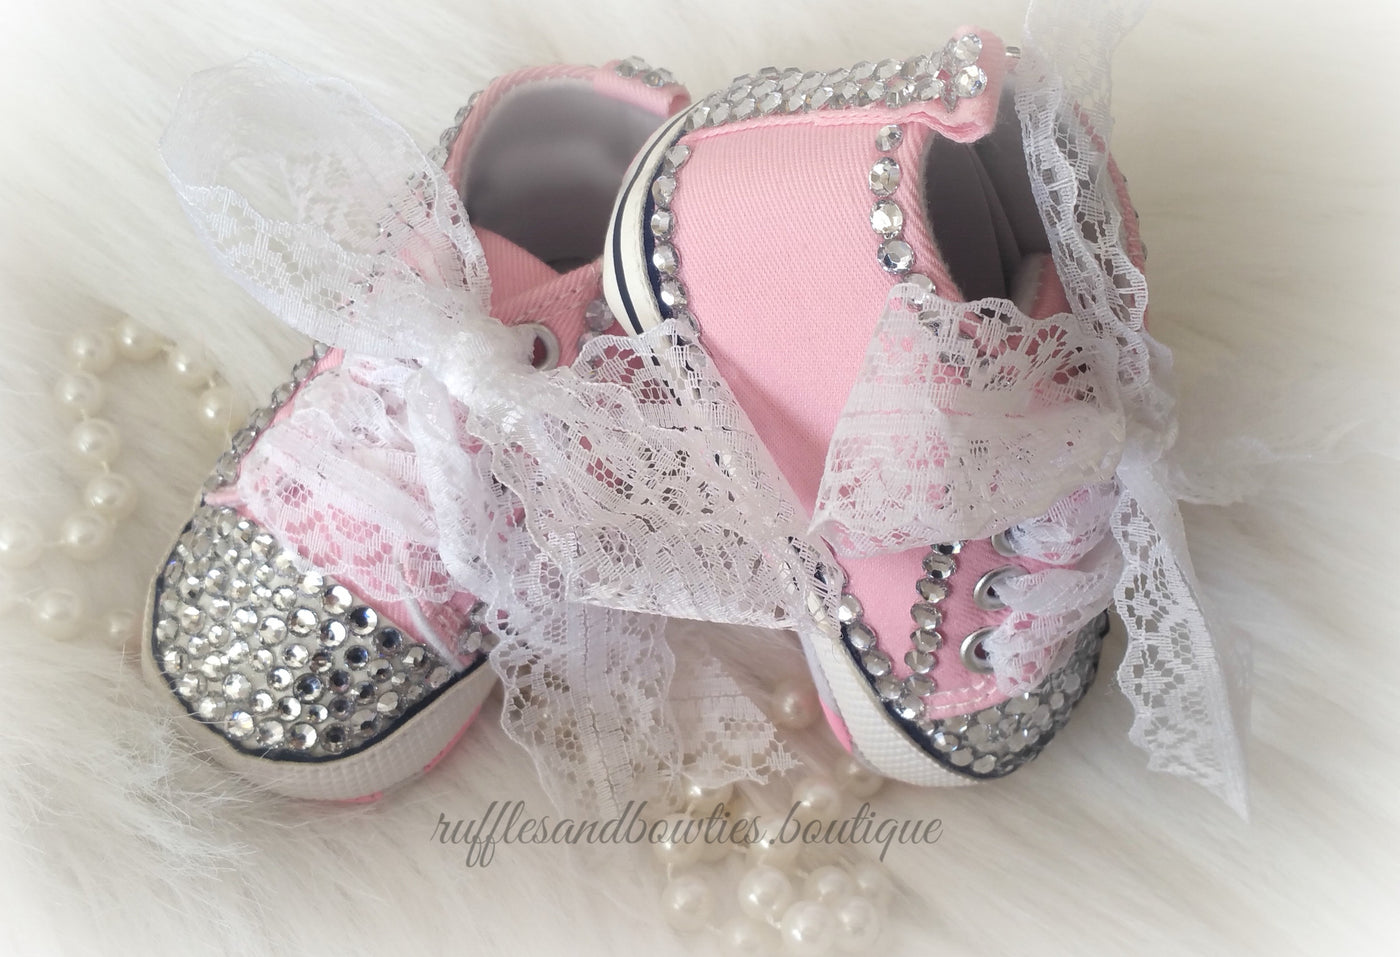 Baby Girl Crystal Converse Shoes - Pink High tops out with Crystals and Lace for Ribbons | Ruffles & Bowties Bowtique